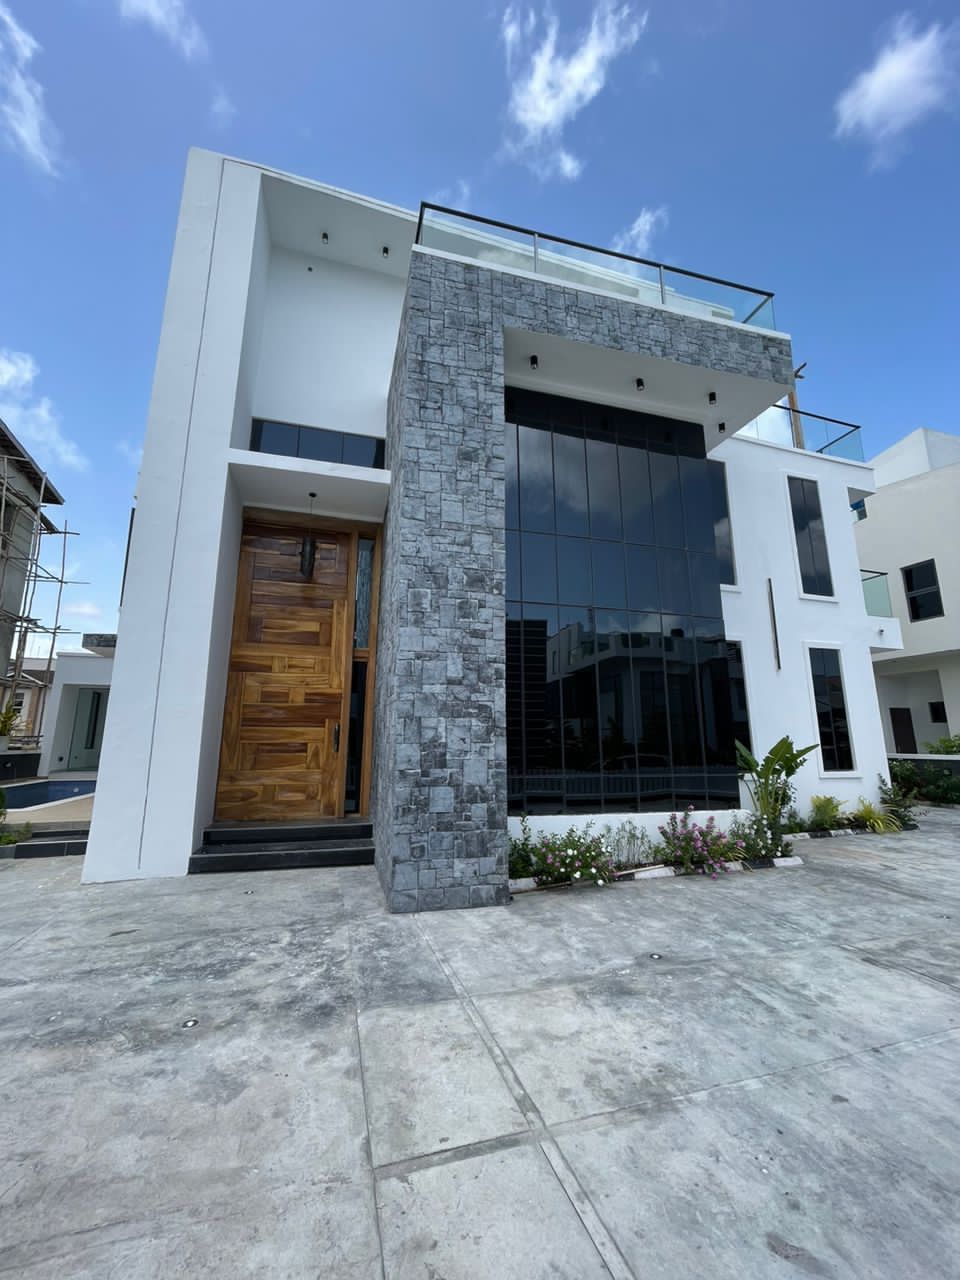 LUXURY 5BEDROOM FULLY DETACHED DUPLEX FOR SALE.